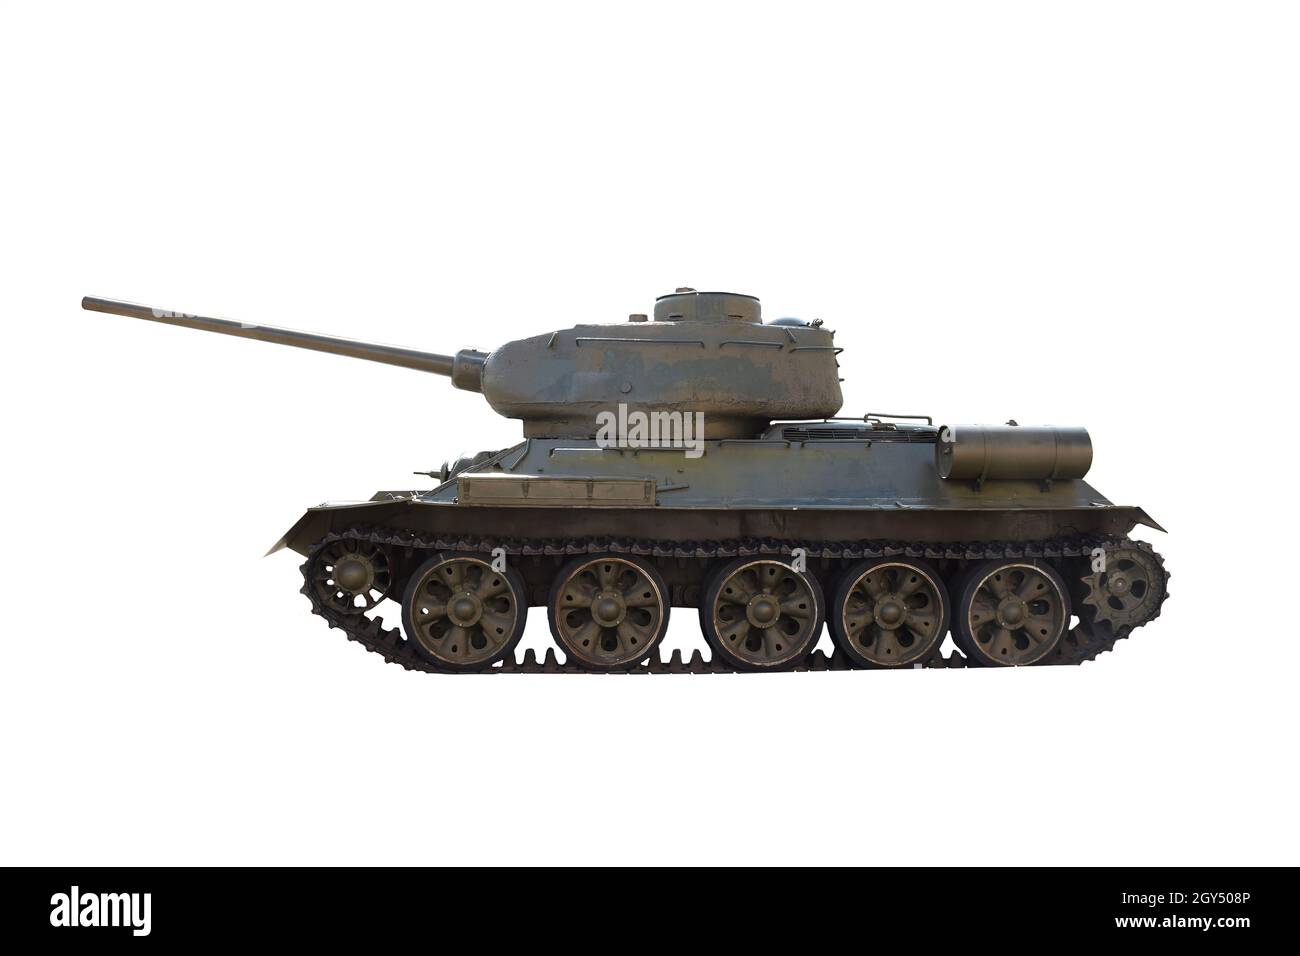 A Soviet T-34 tank stands sideways in the bright sun on a clean white background with clipping. Photographed from the side Stock Photo